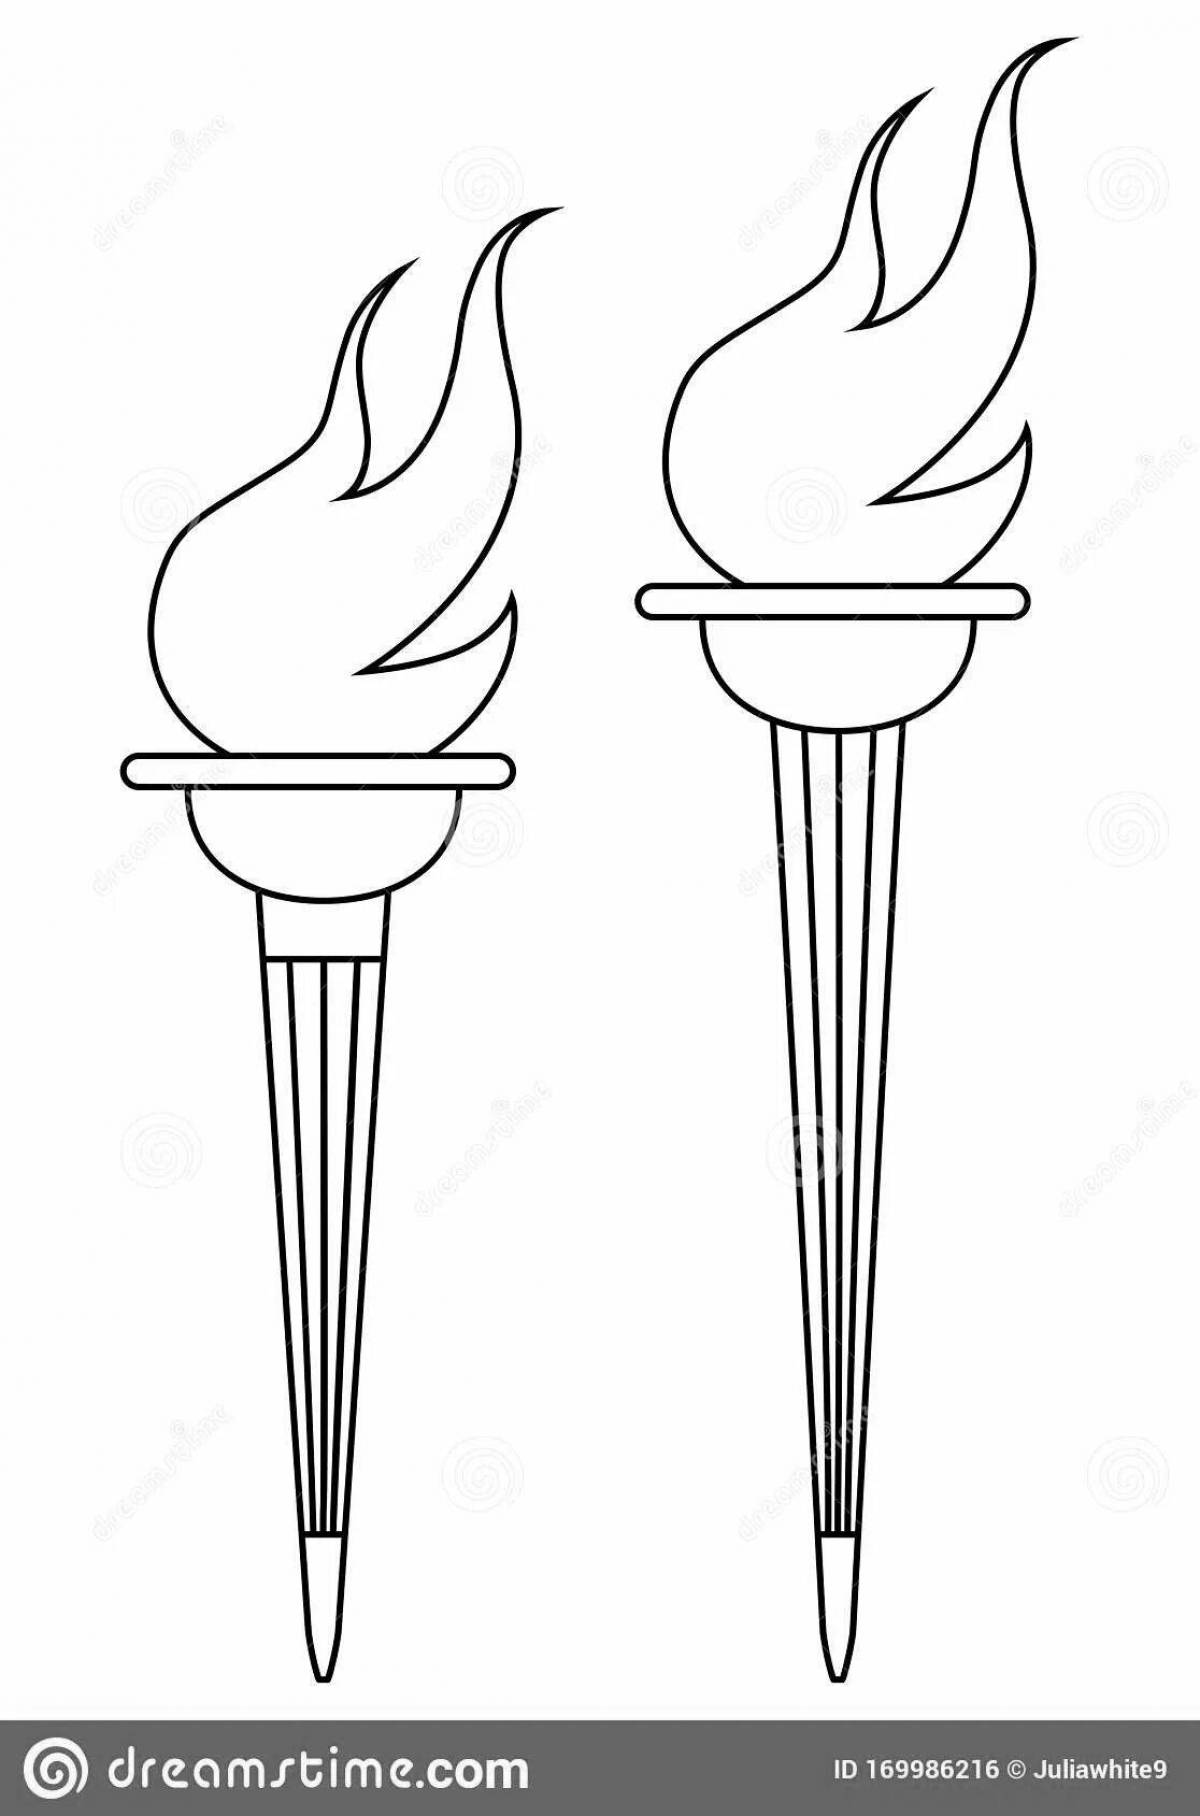 Large olympic torch coloring page